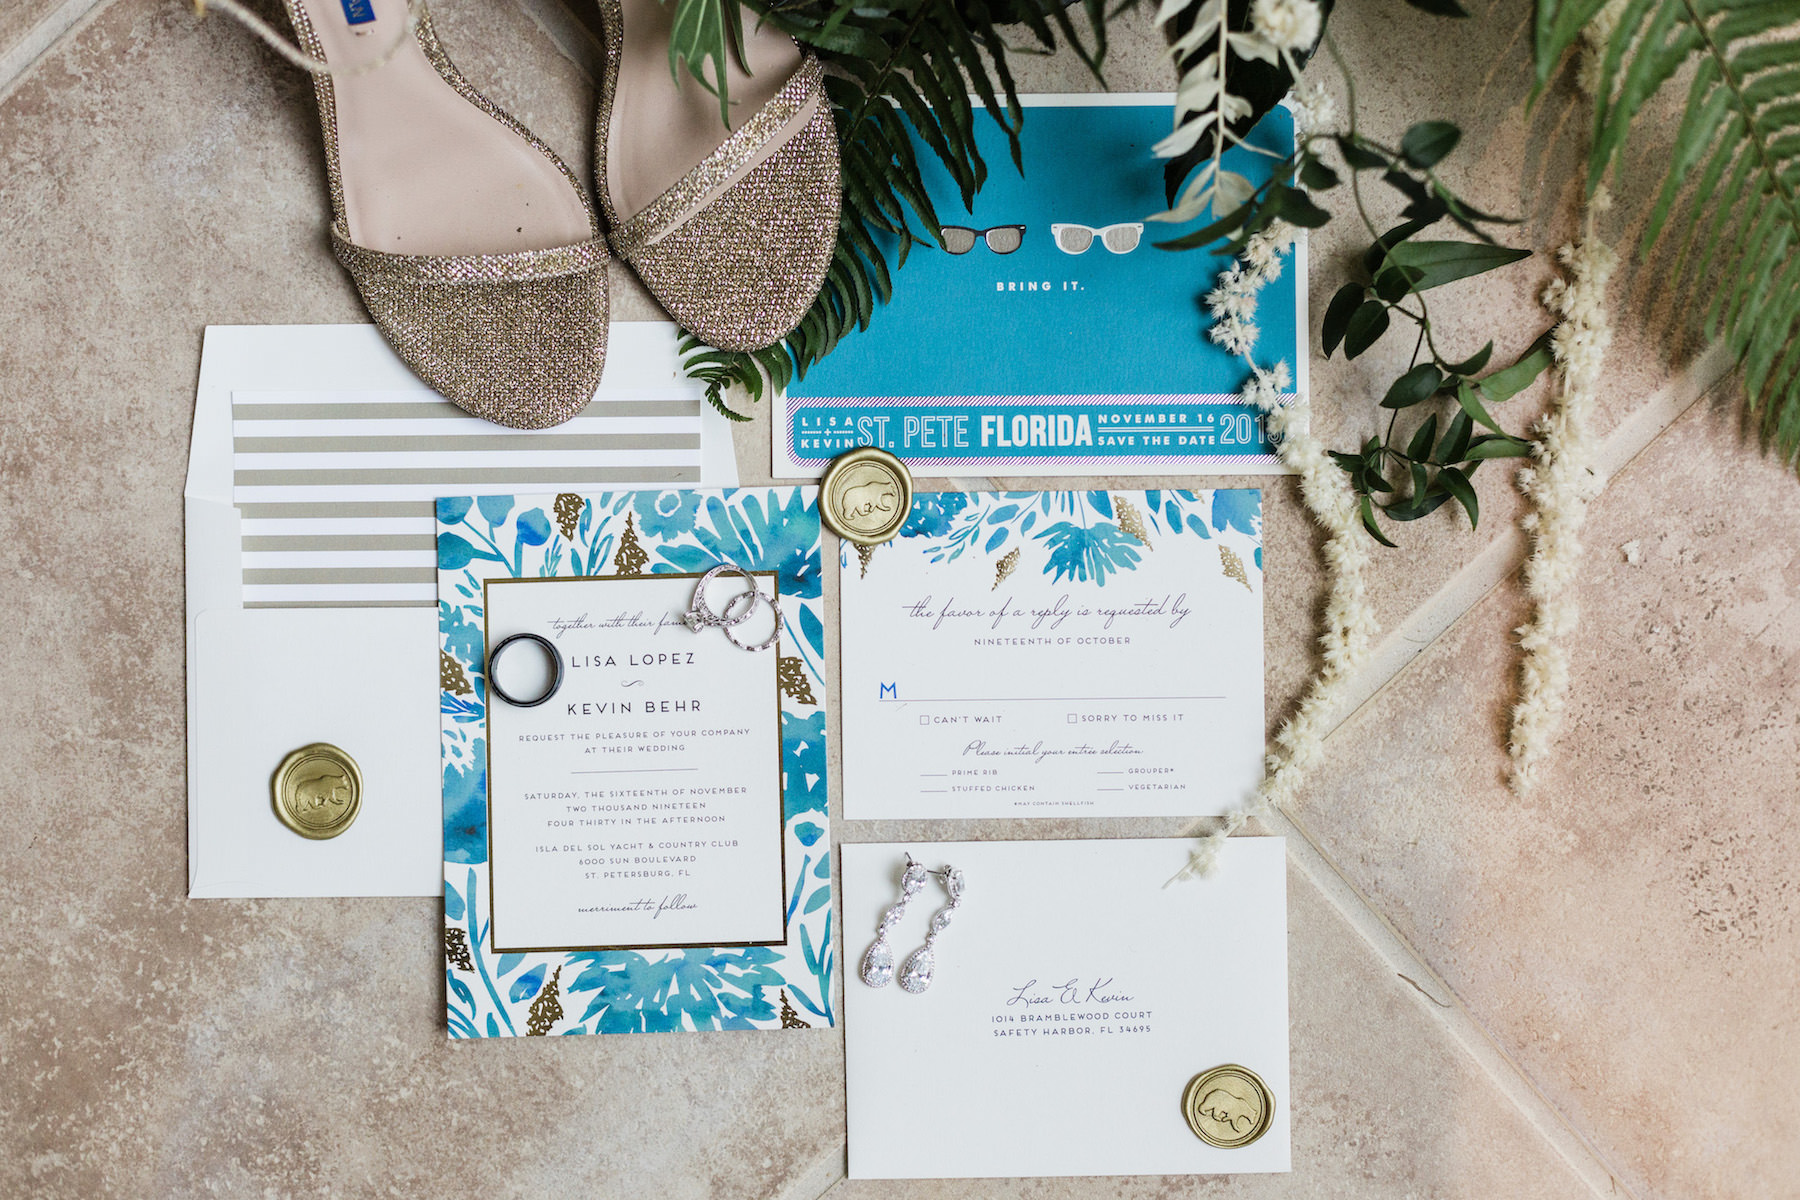 St. Pete Beach Wedding Stationery | Aqua Blue Teal Turquoise Watercolor Wedding Invitation Set with Bear Wax Seals